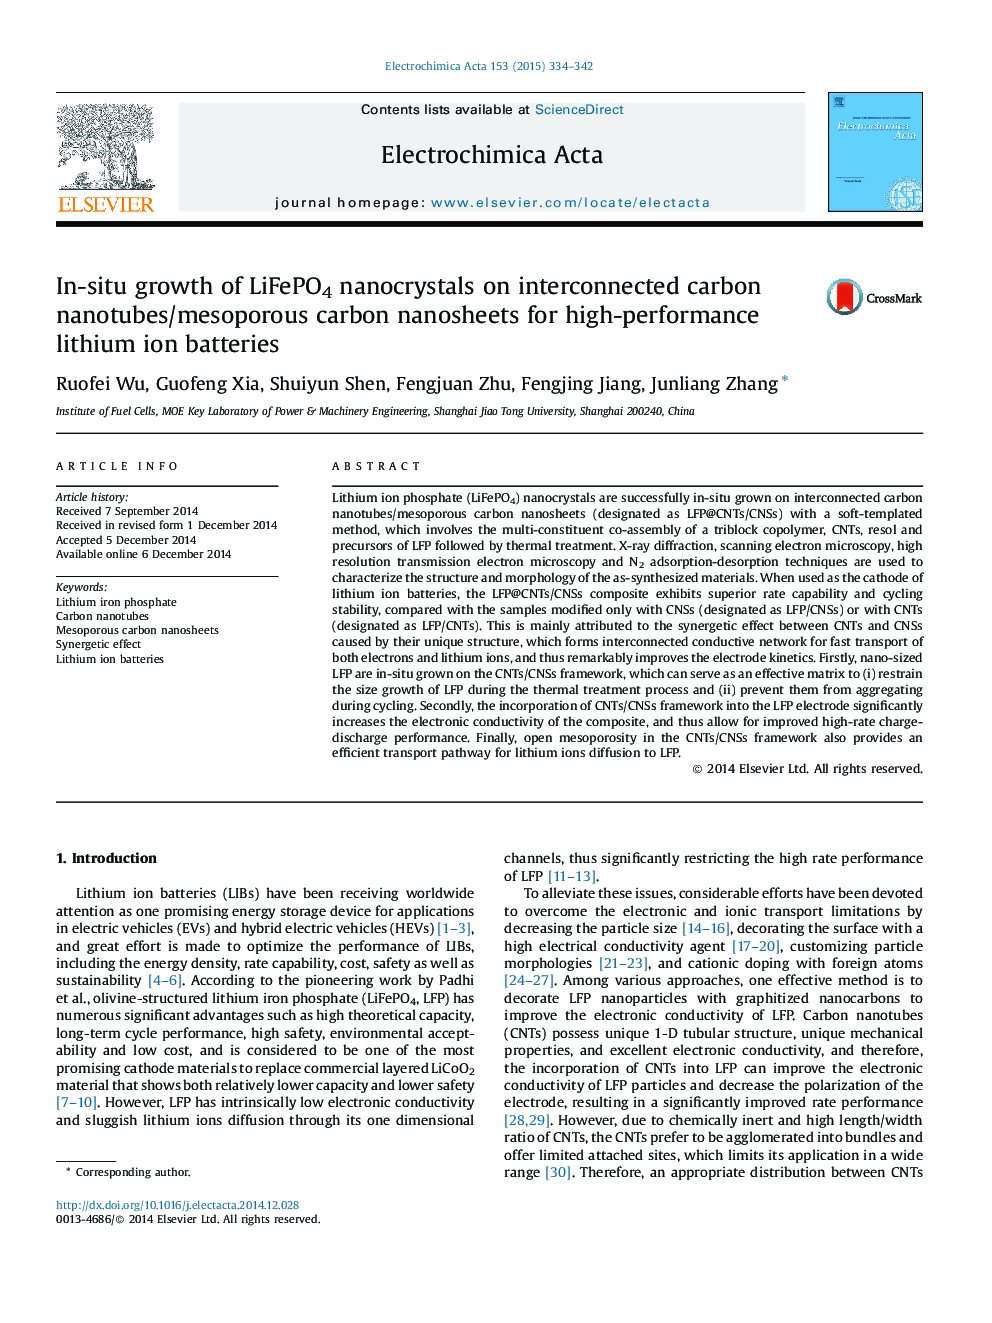 In-situ growth of LiFePO4 nanocrystals on interconnected carbon nanotubes/mesoporous carbon nanosheets for high-performance lithium ion batteries